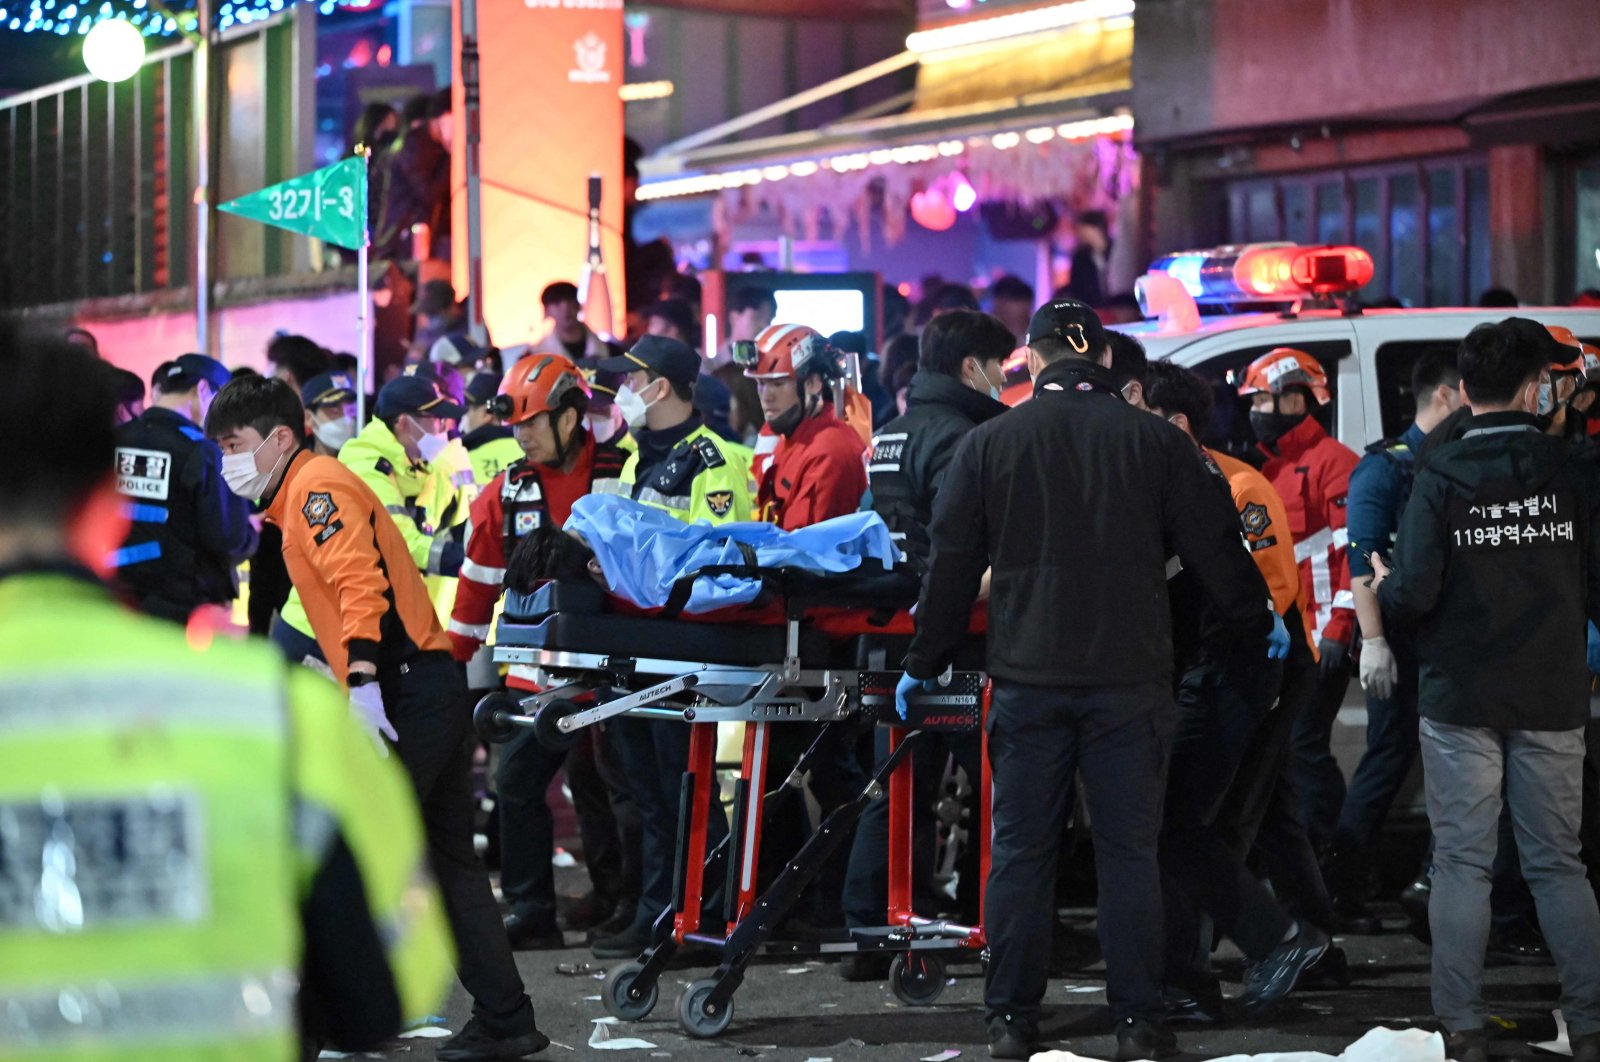 A person, believed to have suffered from cardiac arrest, is transported on a stretcher in the popular nightlife district of Itaewon in Seoul, South Korea, Oct. 30, 2022. (AFP Photo)